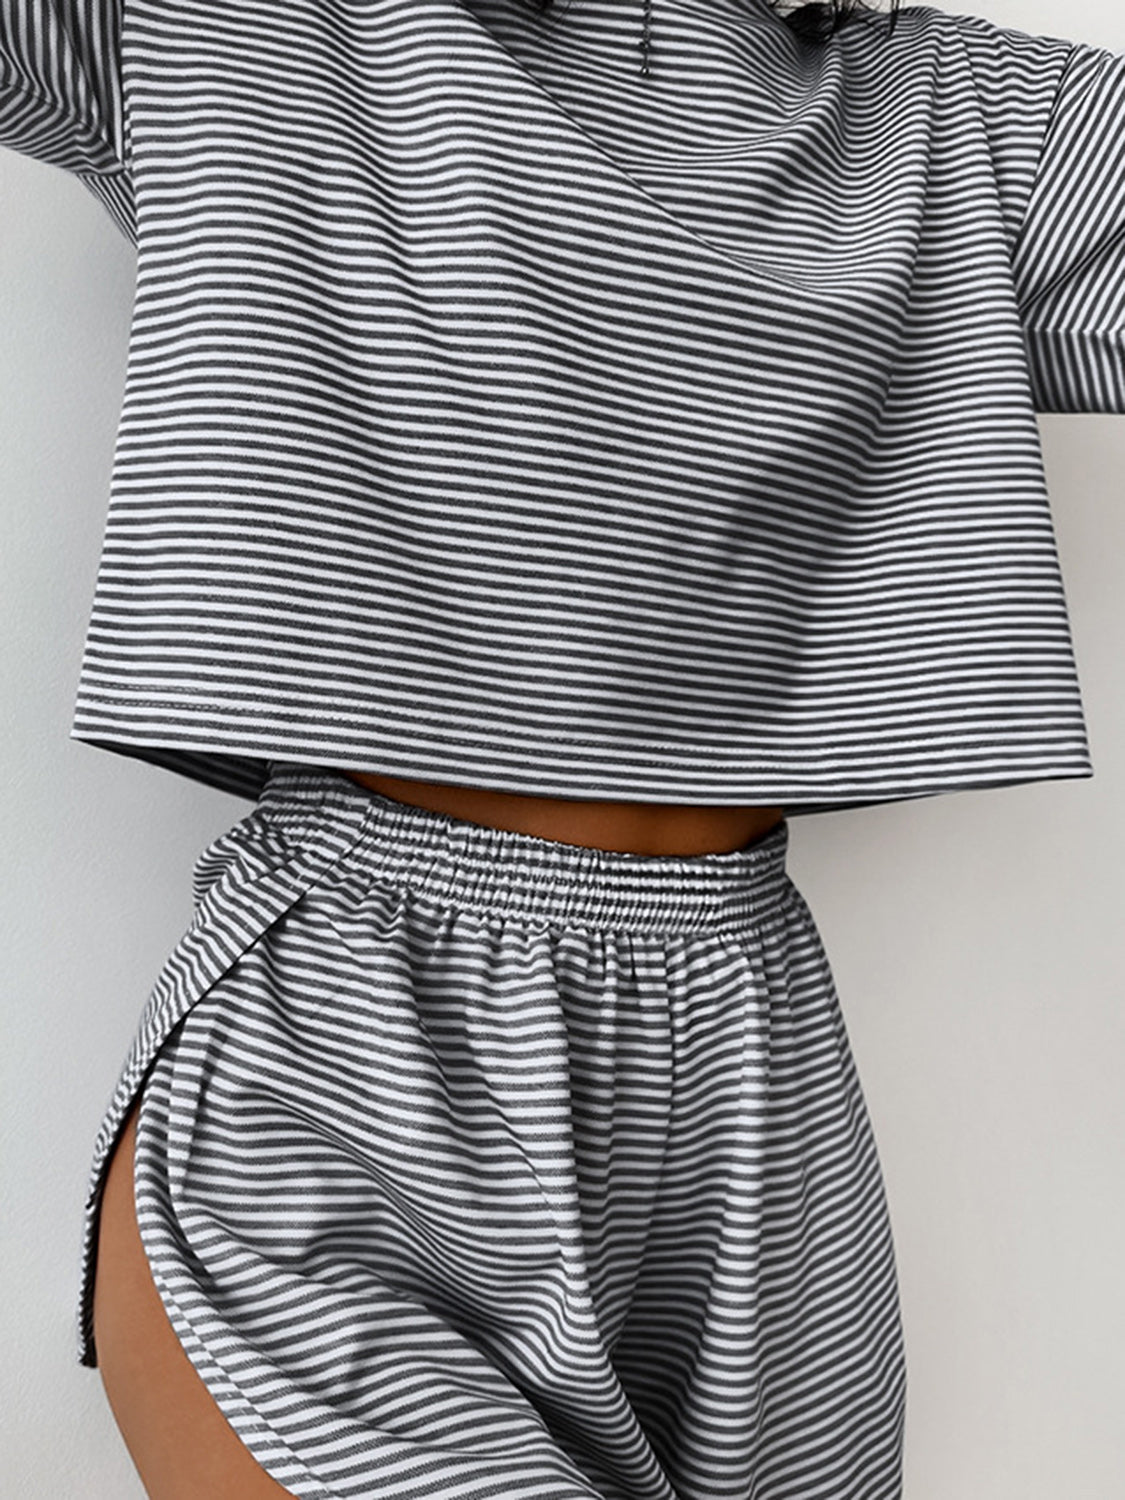 Striped Round Neck Top and Shorts Set Loungewear Two Piece Outfit Set Cotton Luxury Premium Fashion